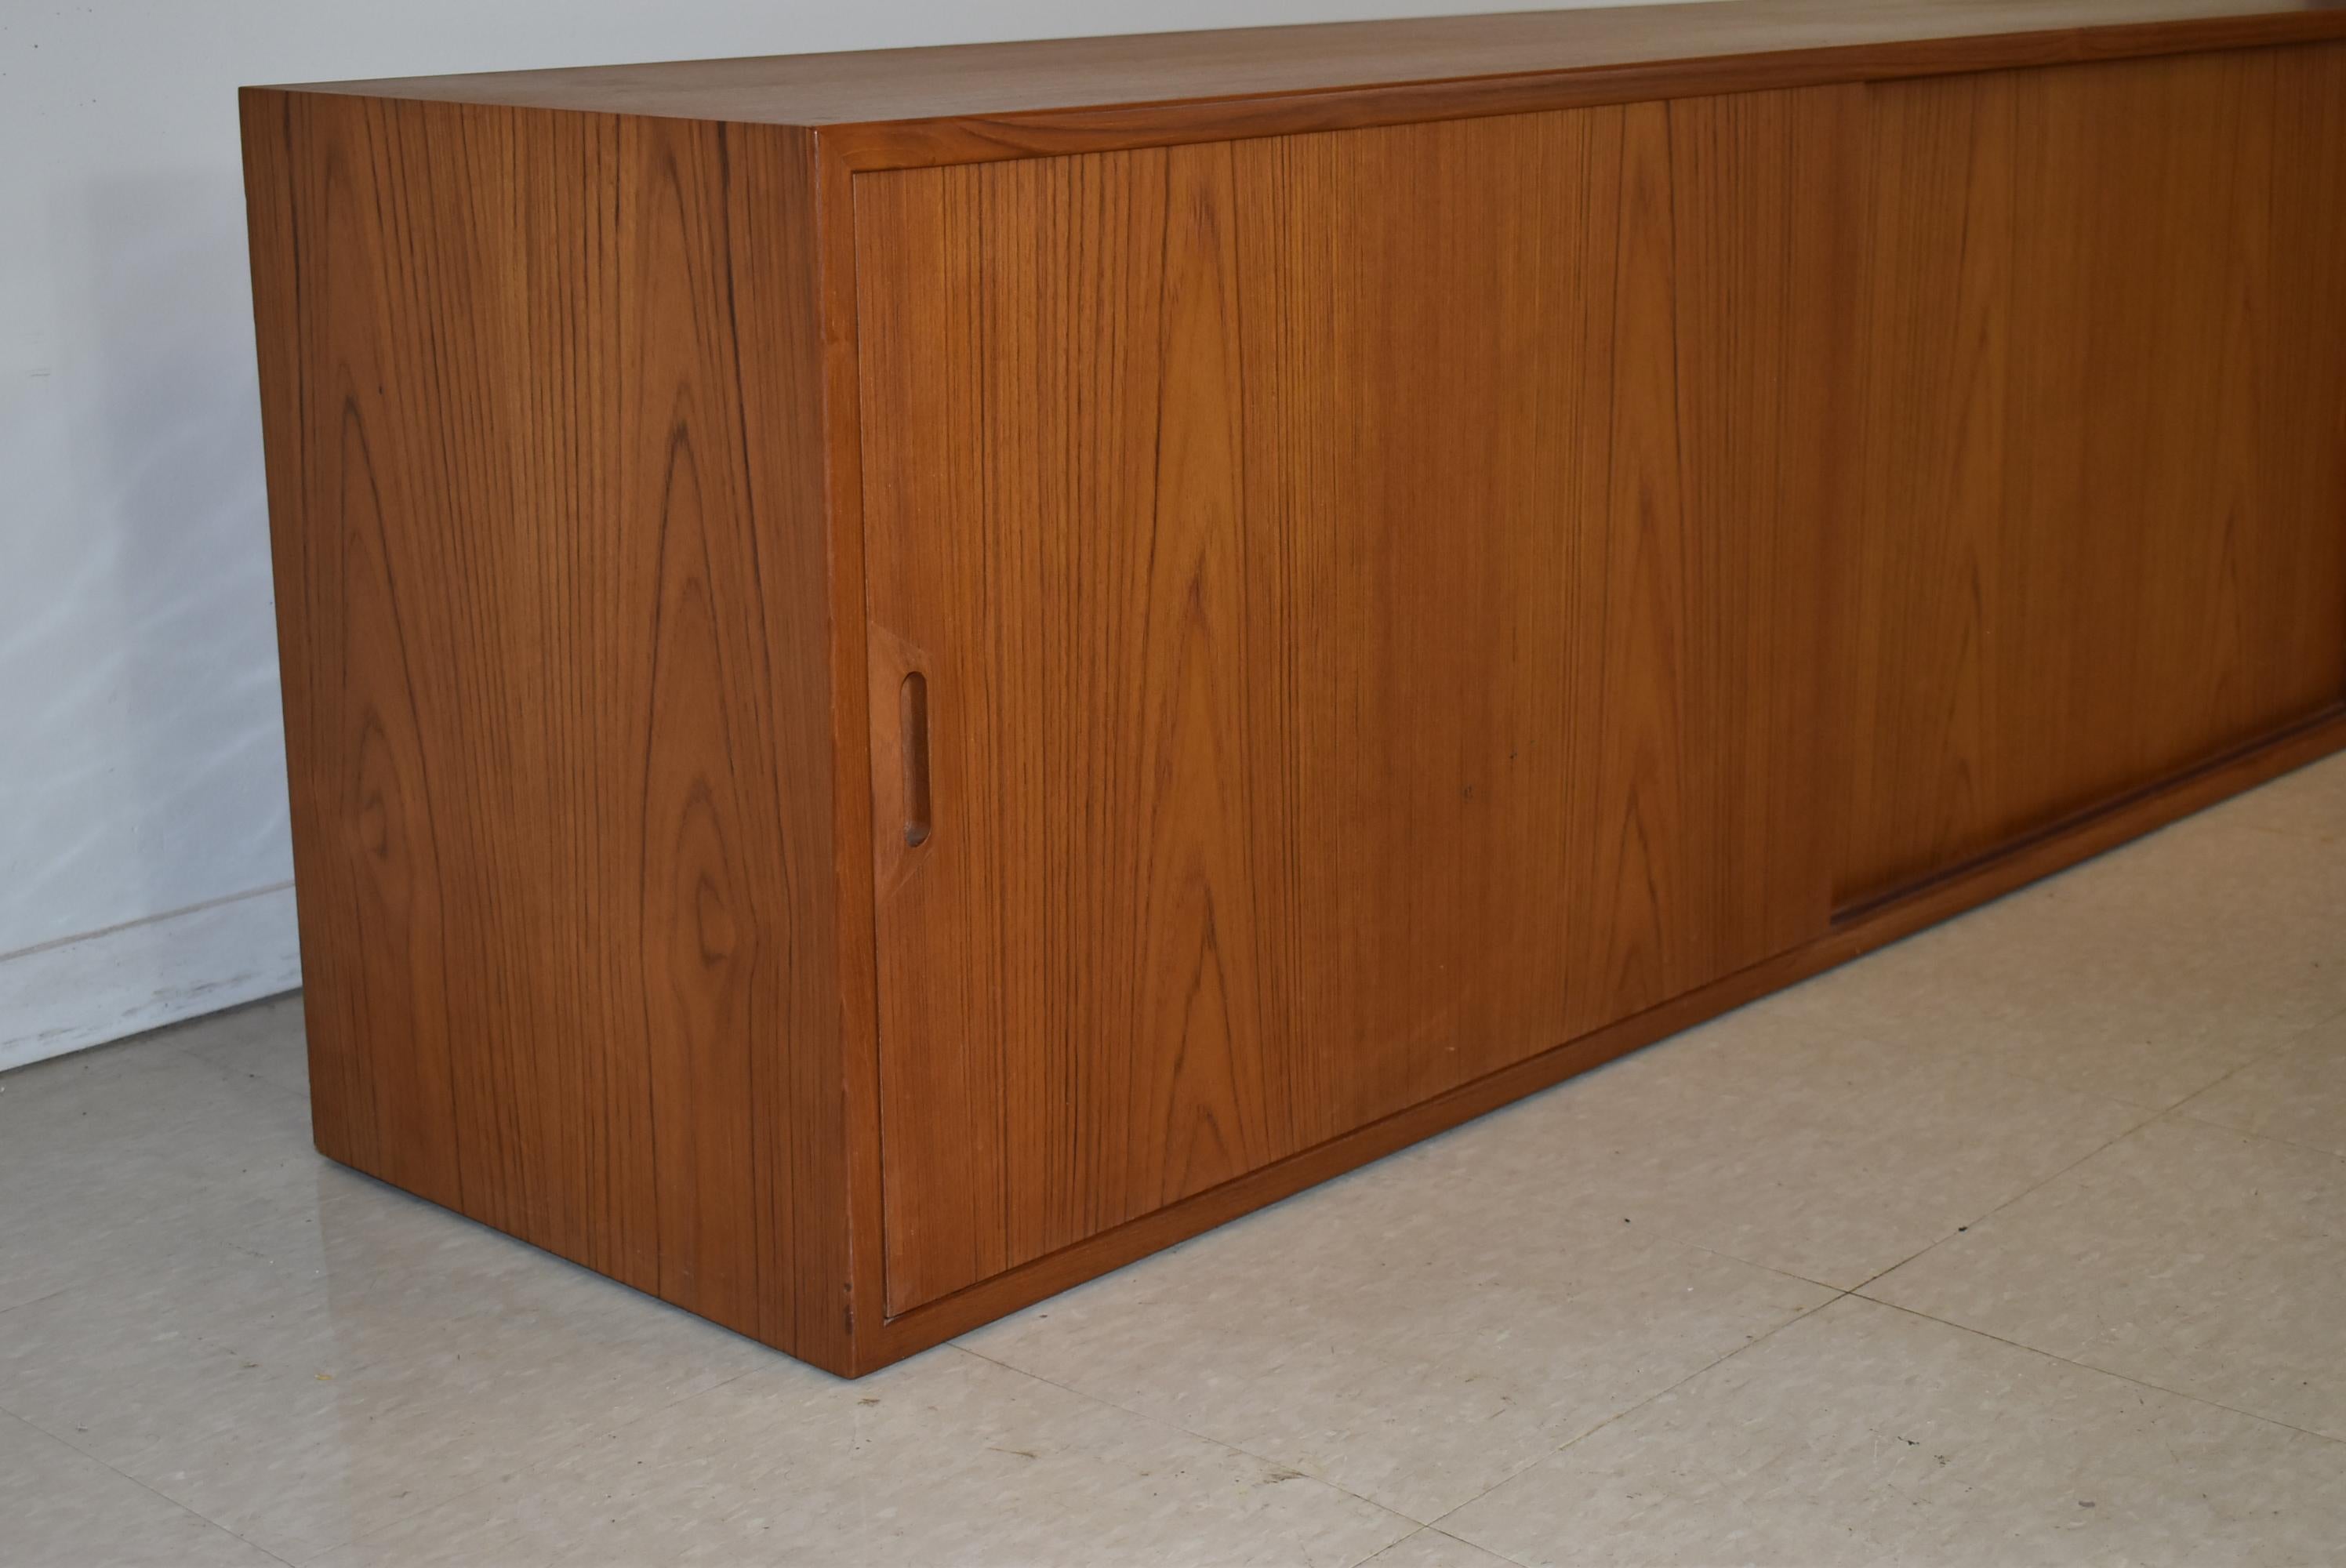 Modern Danish oiled teak floating wall cabinet with two sliding doors and removable shelves. No mounting hardware.